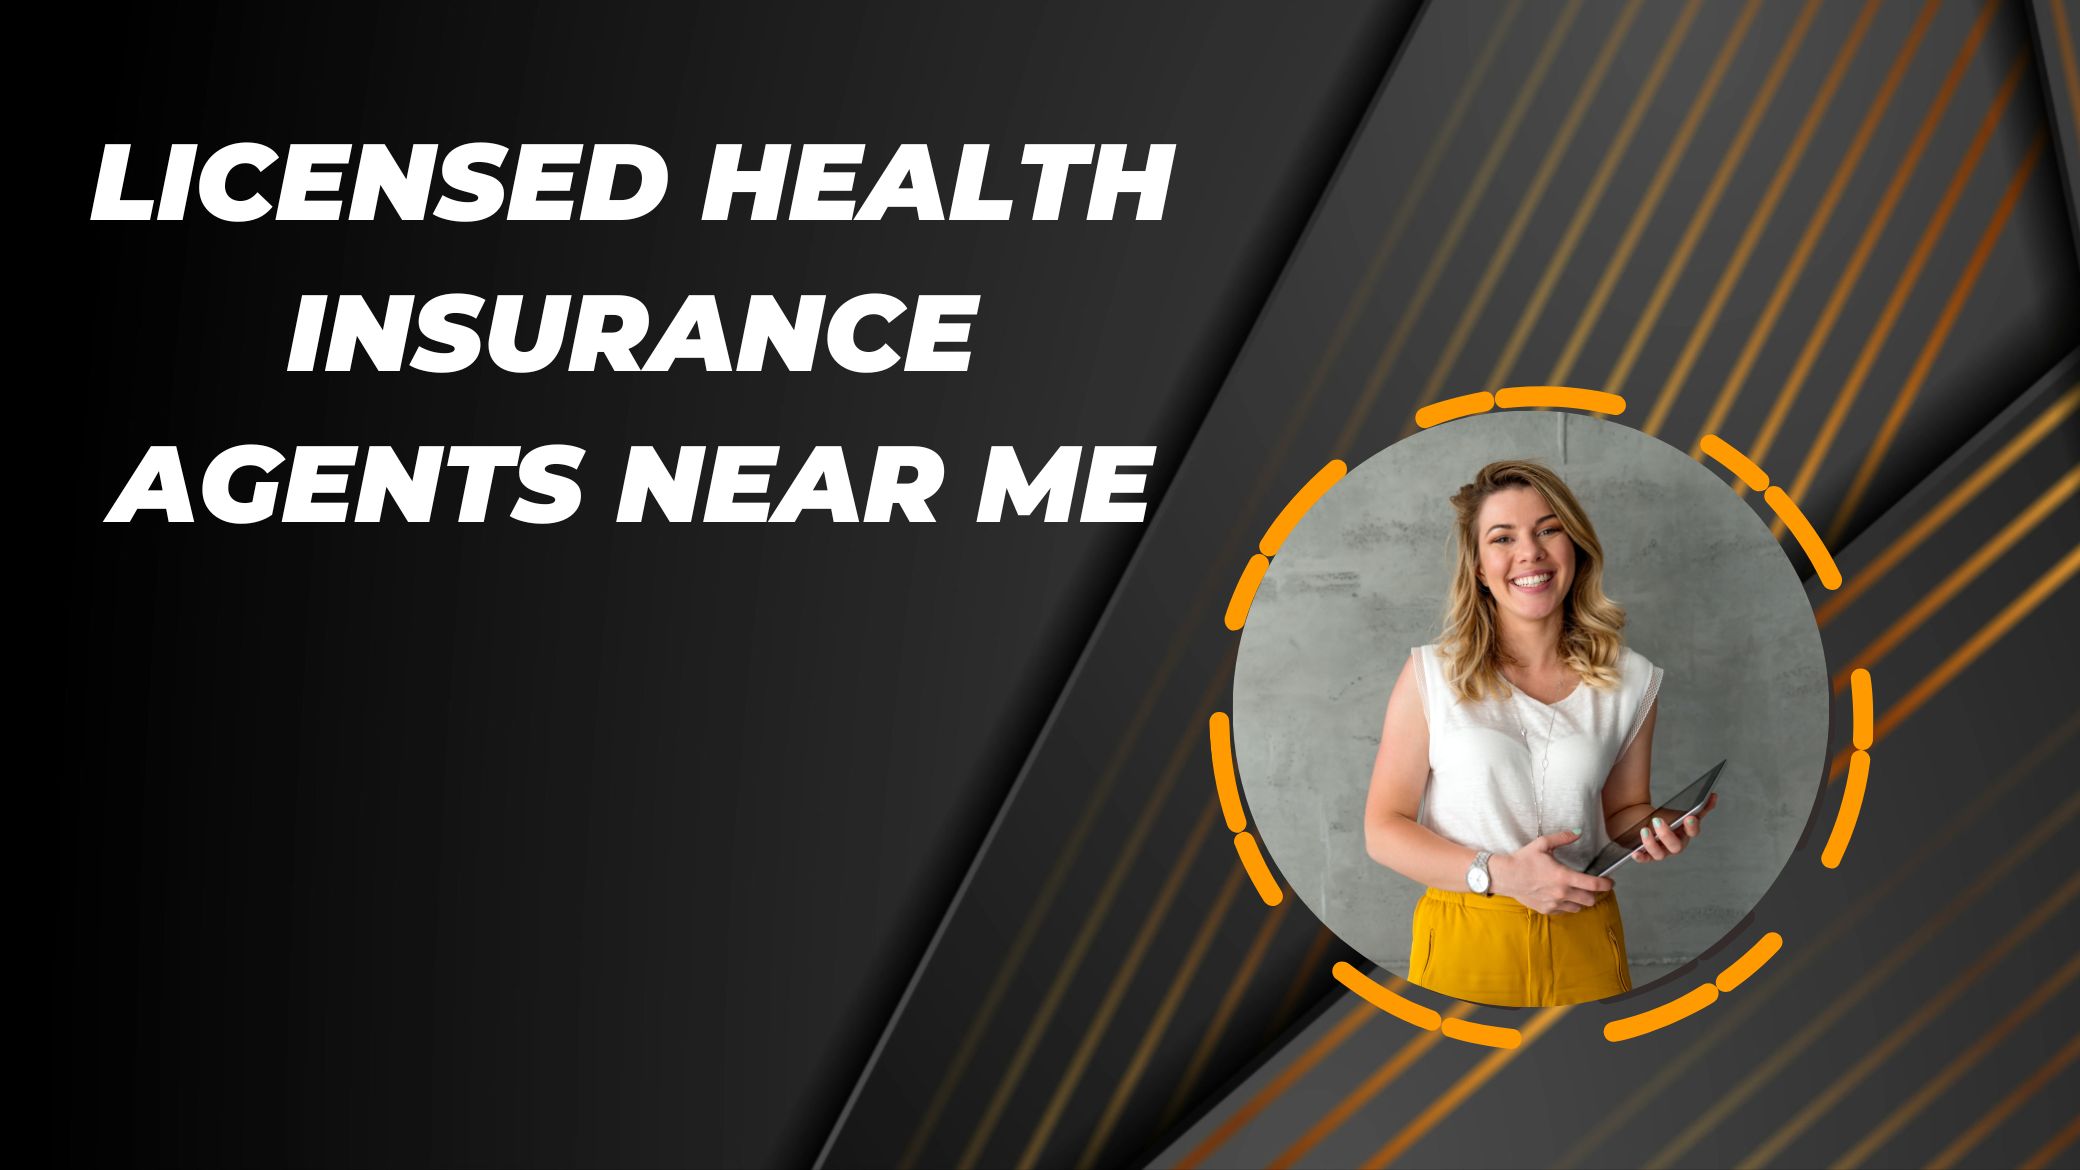 Licensed Health Insurance Agents Near Me